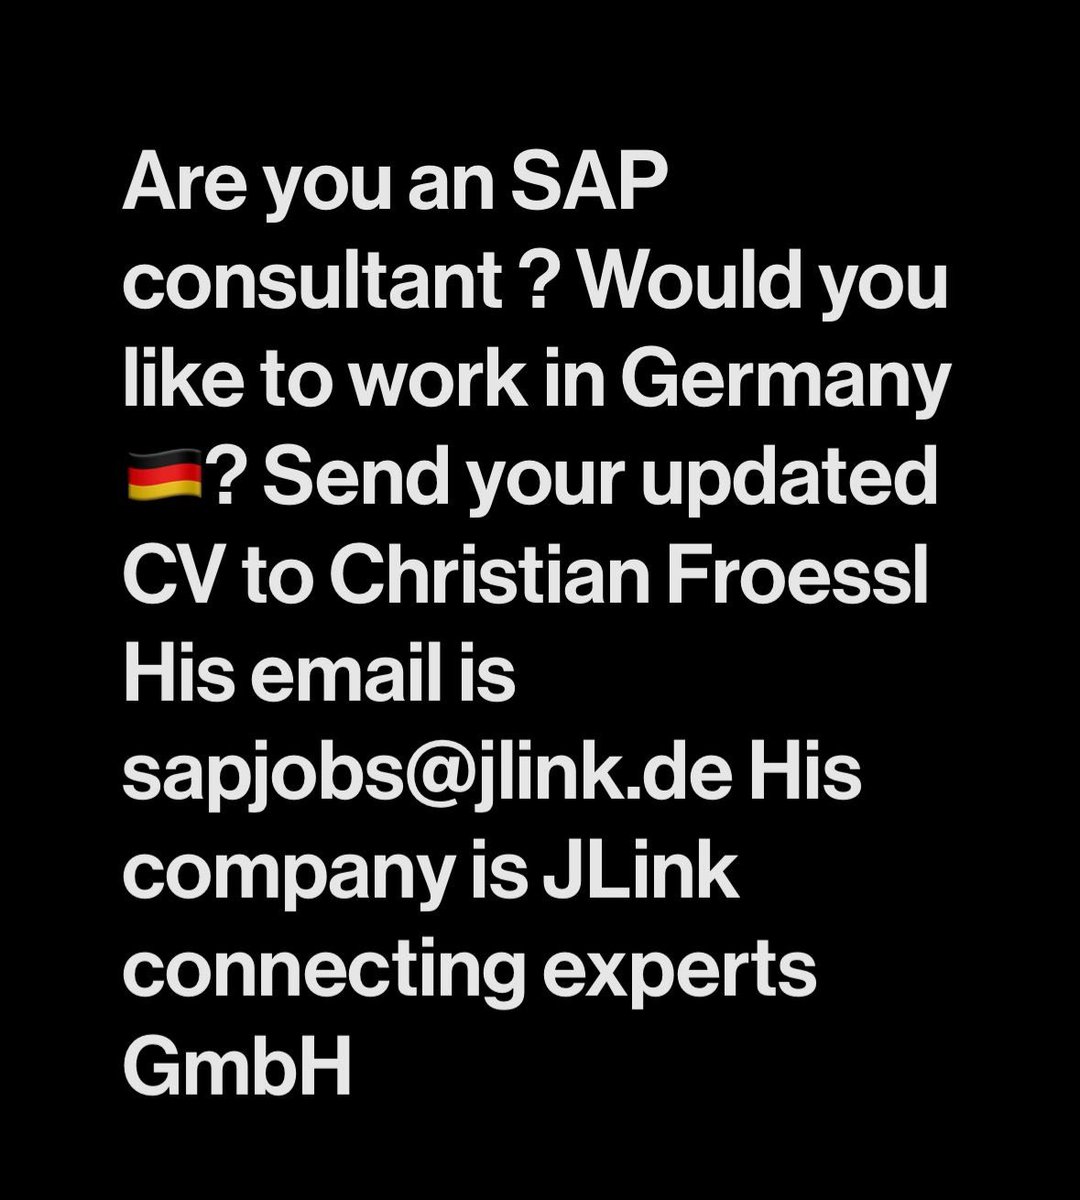 Are you an SAP consultant ? Would you like to work in Germany 🇩🇪? Send your updated CV to Christian Froessl  His email is sapjobs@jlink.de His company is JLink connecting experts GmbH  connecting 

#germany 
#sap 
#jobs 
#sapjobs 
#berlin 
#munich 
#india 
#technology